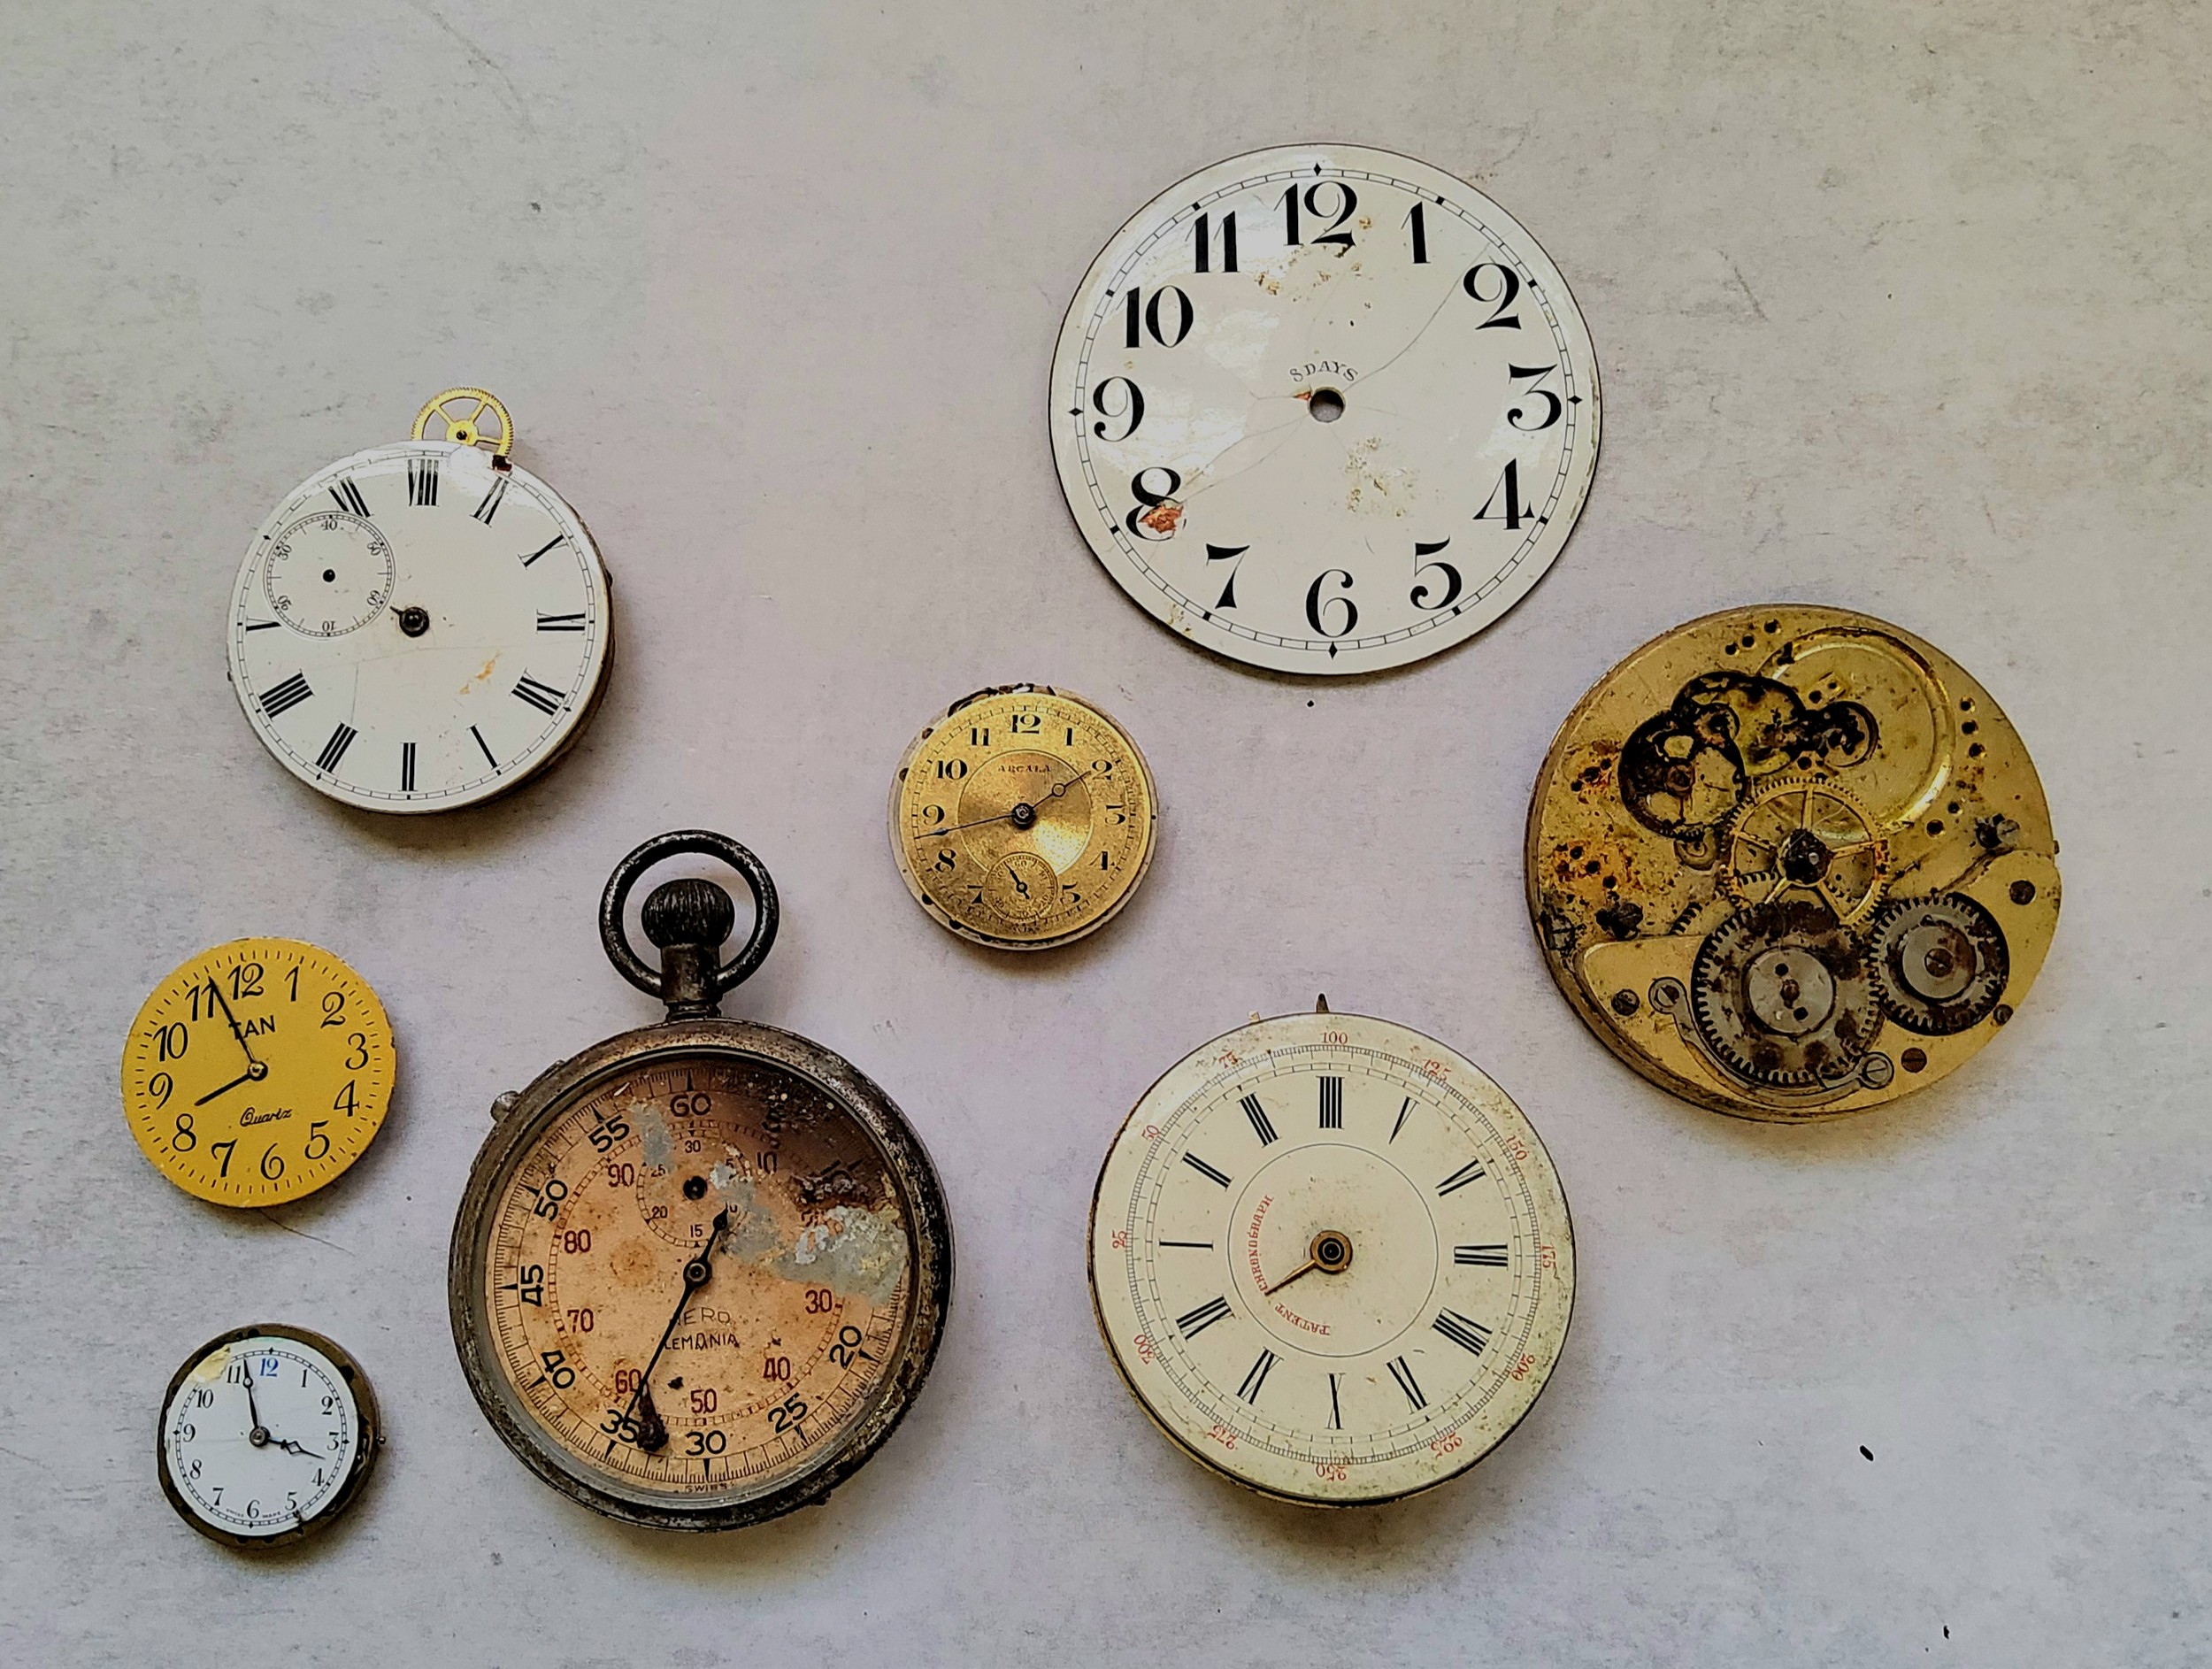 Horology - Various 19th century and later pocket watch parts including cogs, dials and repair parts. - Image 2 of 2